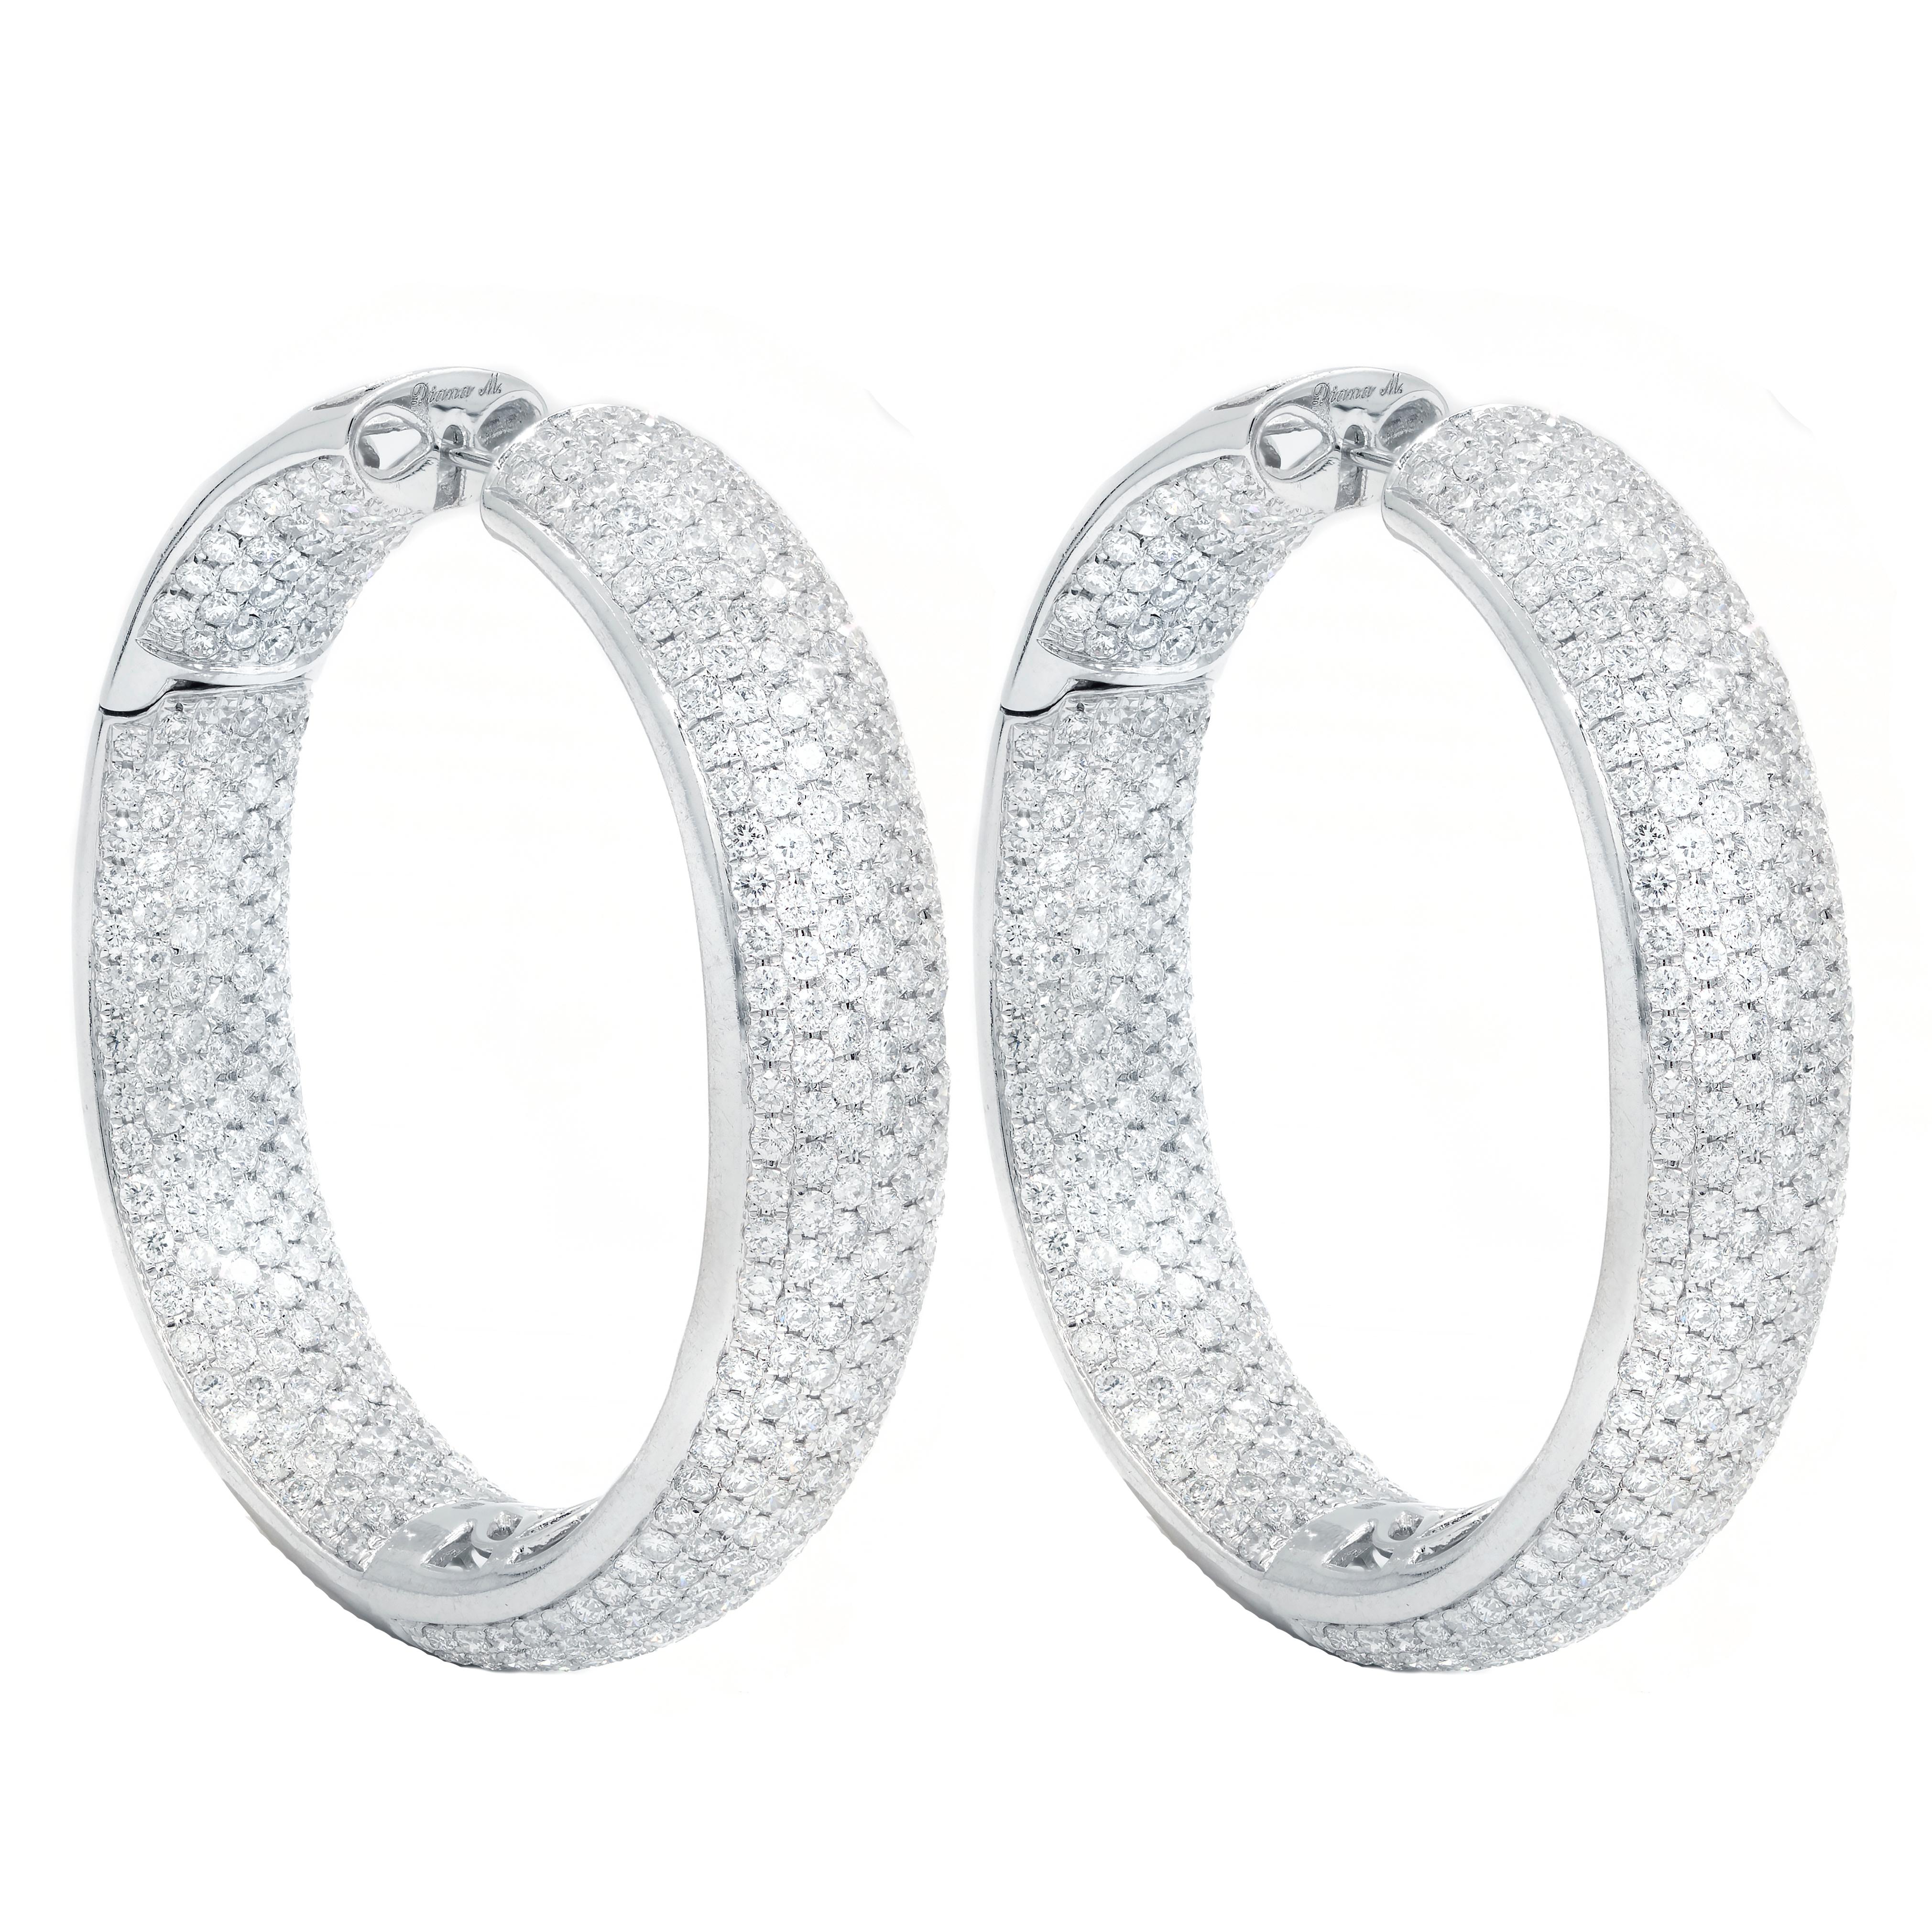 Modern Diana M. 18 kt white gold inside-out hoop earrings adorned with 5 rows of 16.75  For Sale